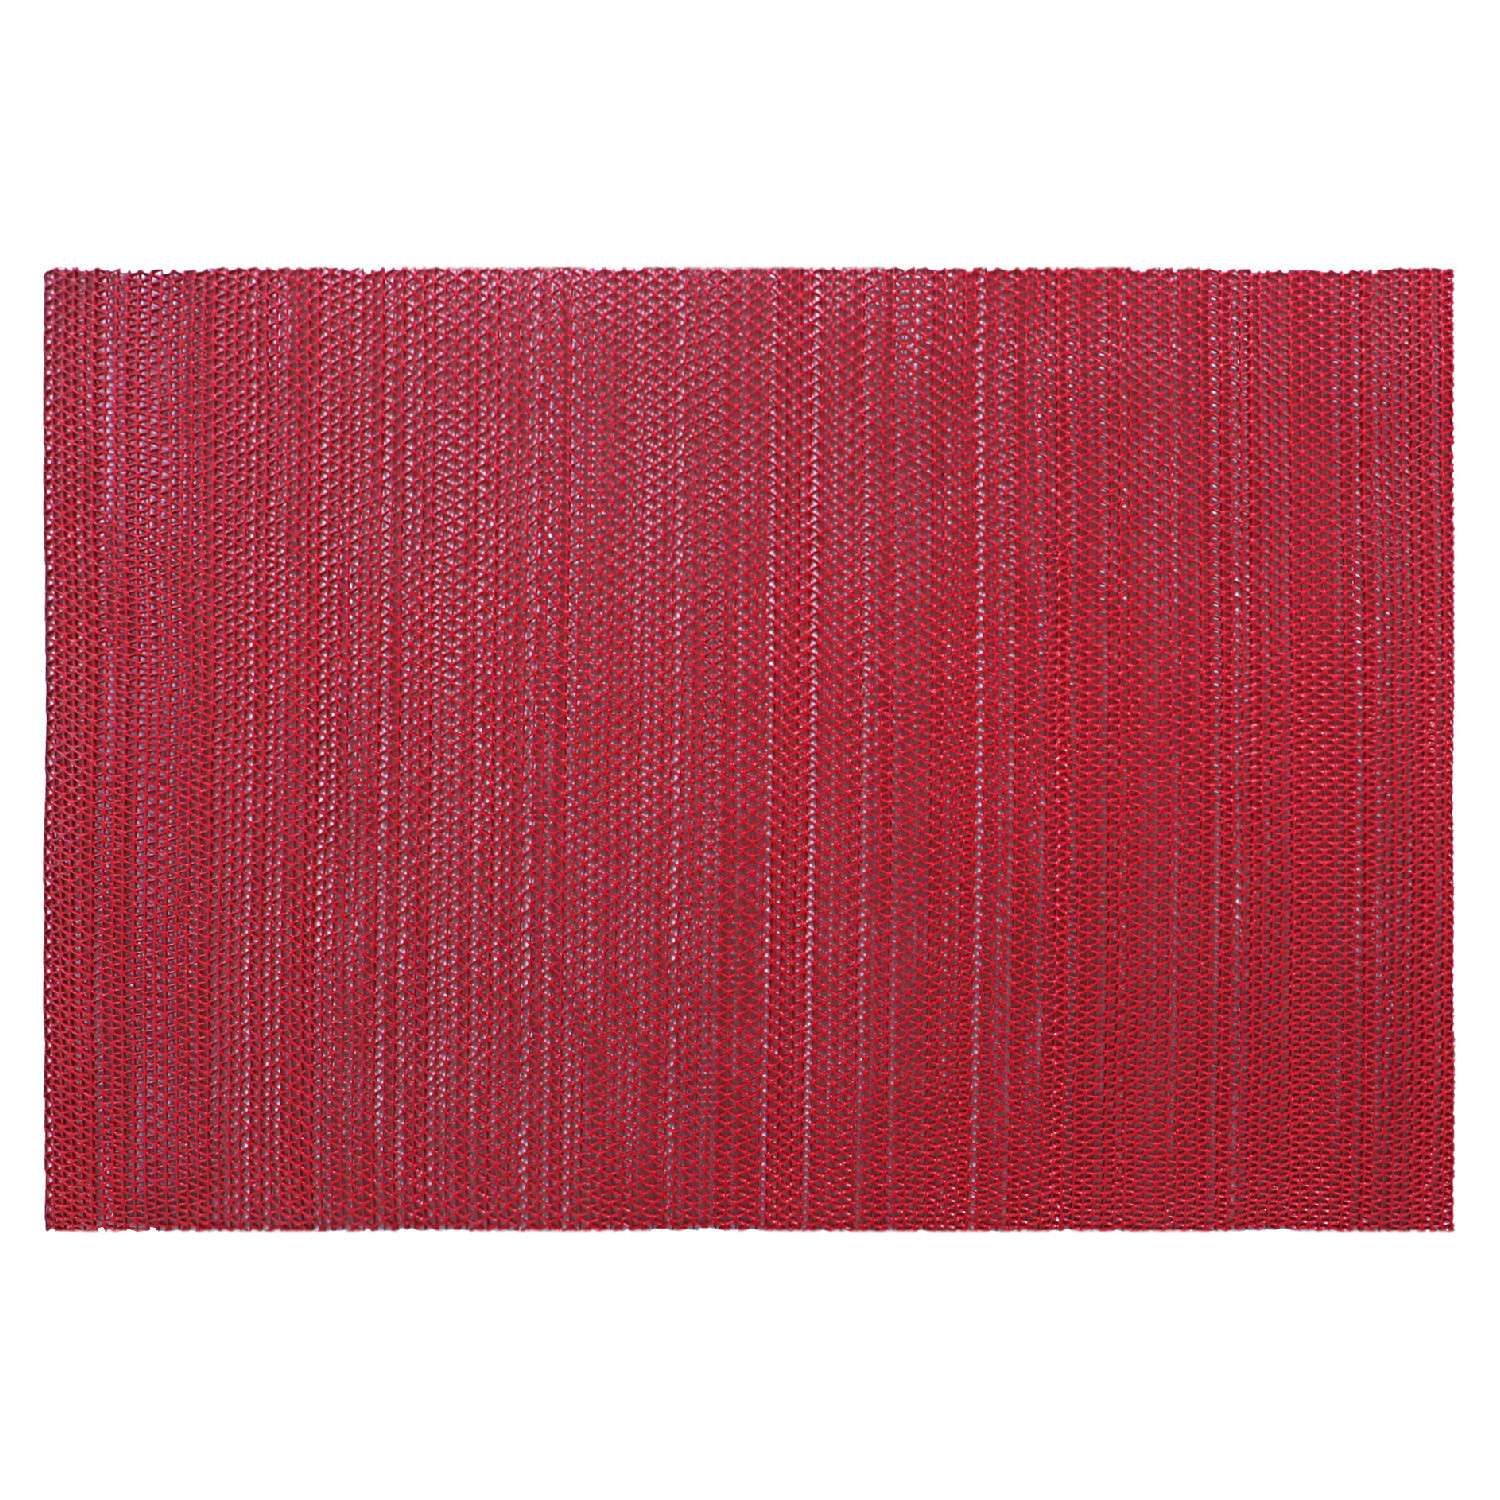 Kuber Industries Rubber Waterproof Anti-Skid Swimming Pool Mat|Shower Mat|Rainmat For Entrance Area,Bathroom,16 x 24 Inch (Red)